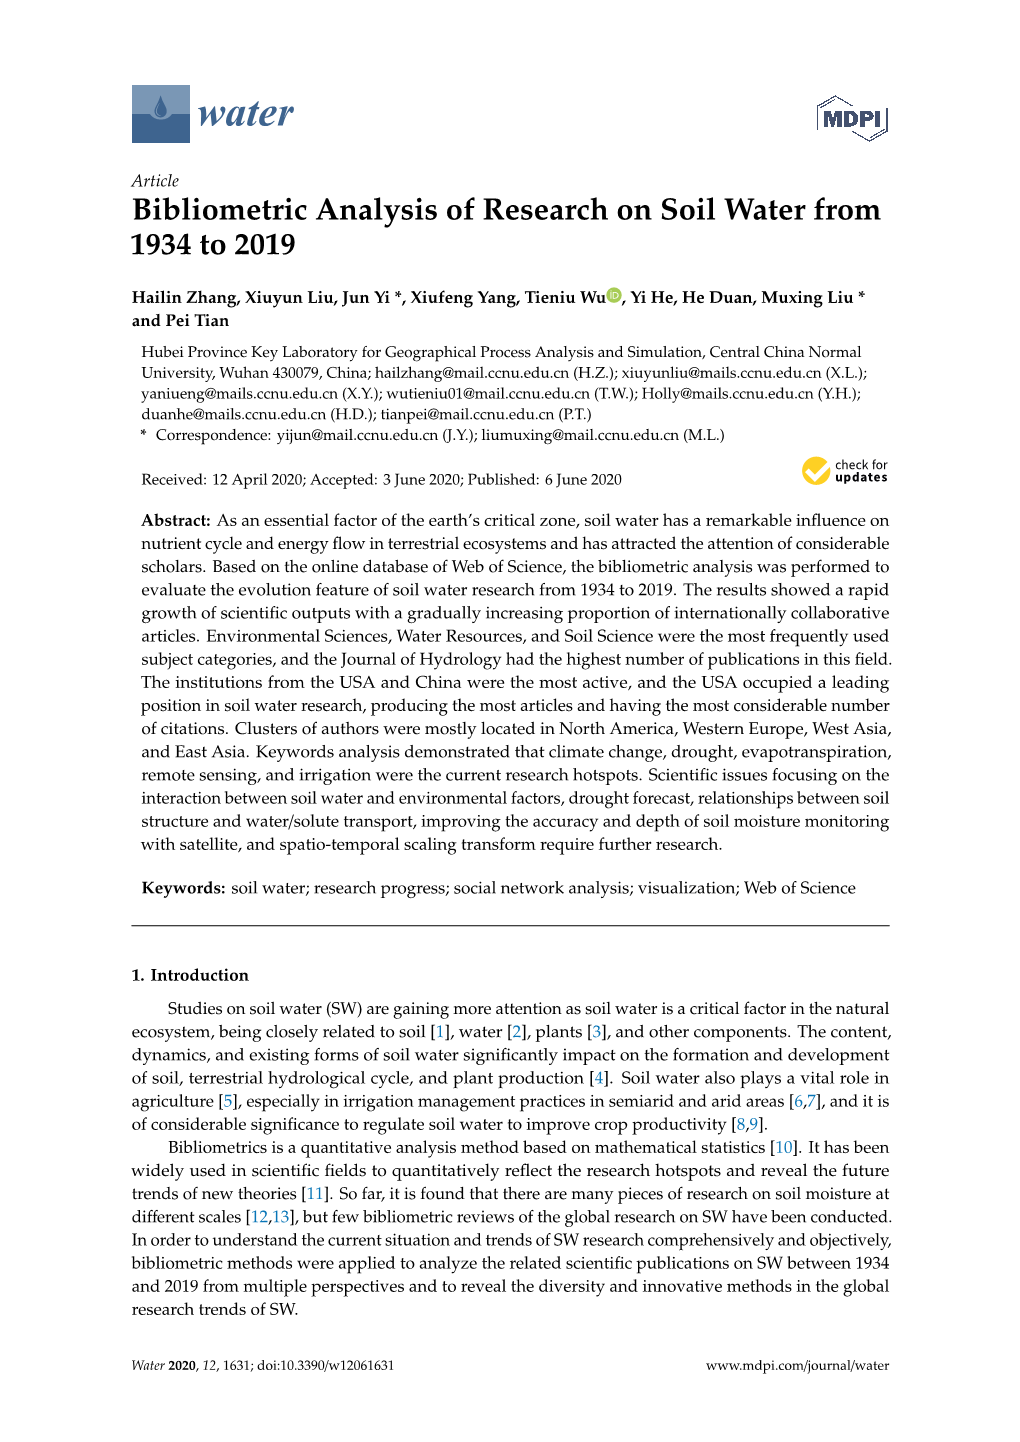 Bibliometric Analysis of Research on Soil Water from 1934 to 2019